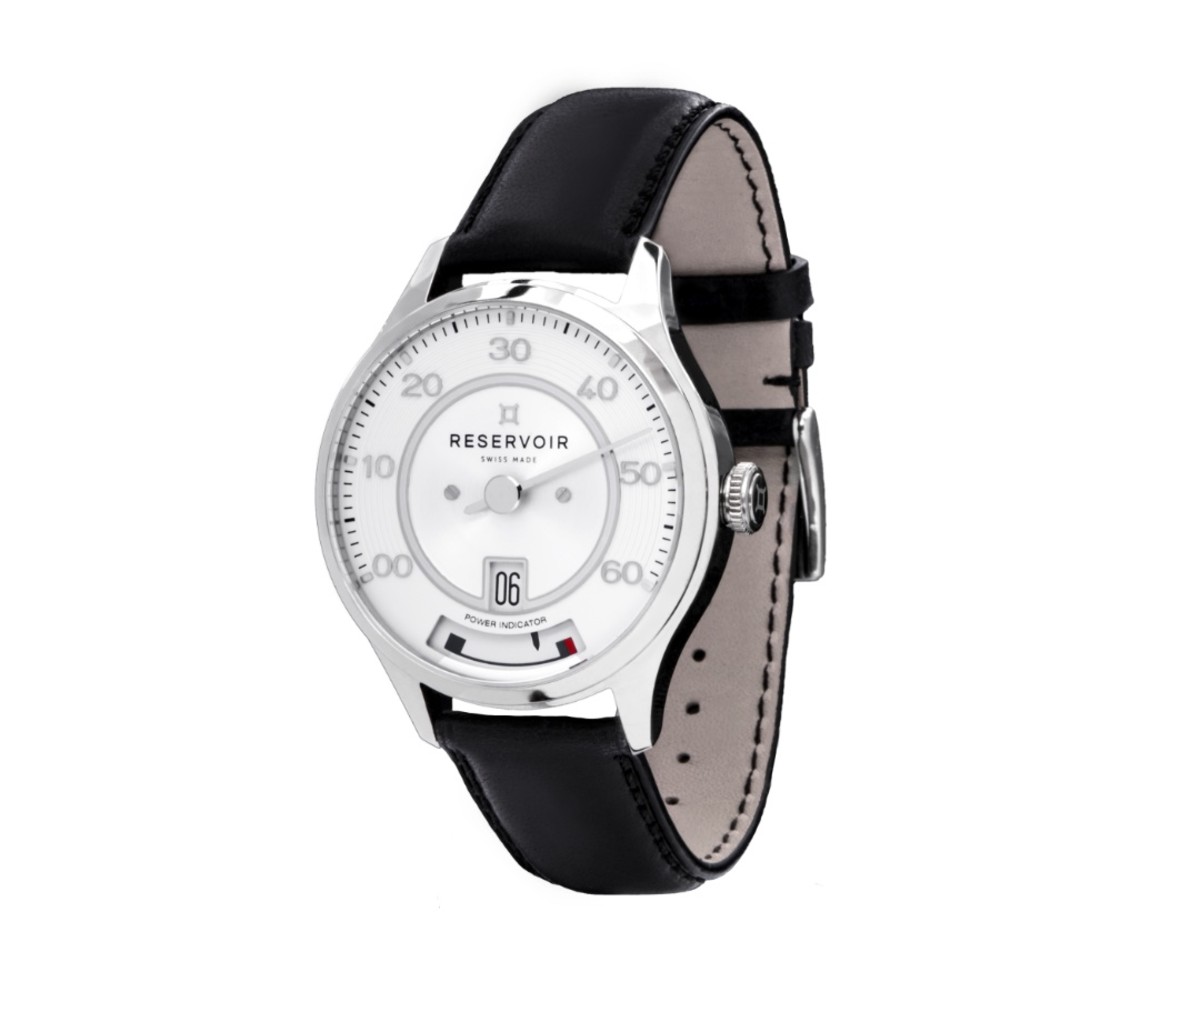 Reservoir kanister watch with a white dail and a black leather strap